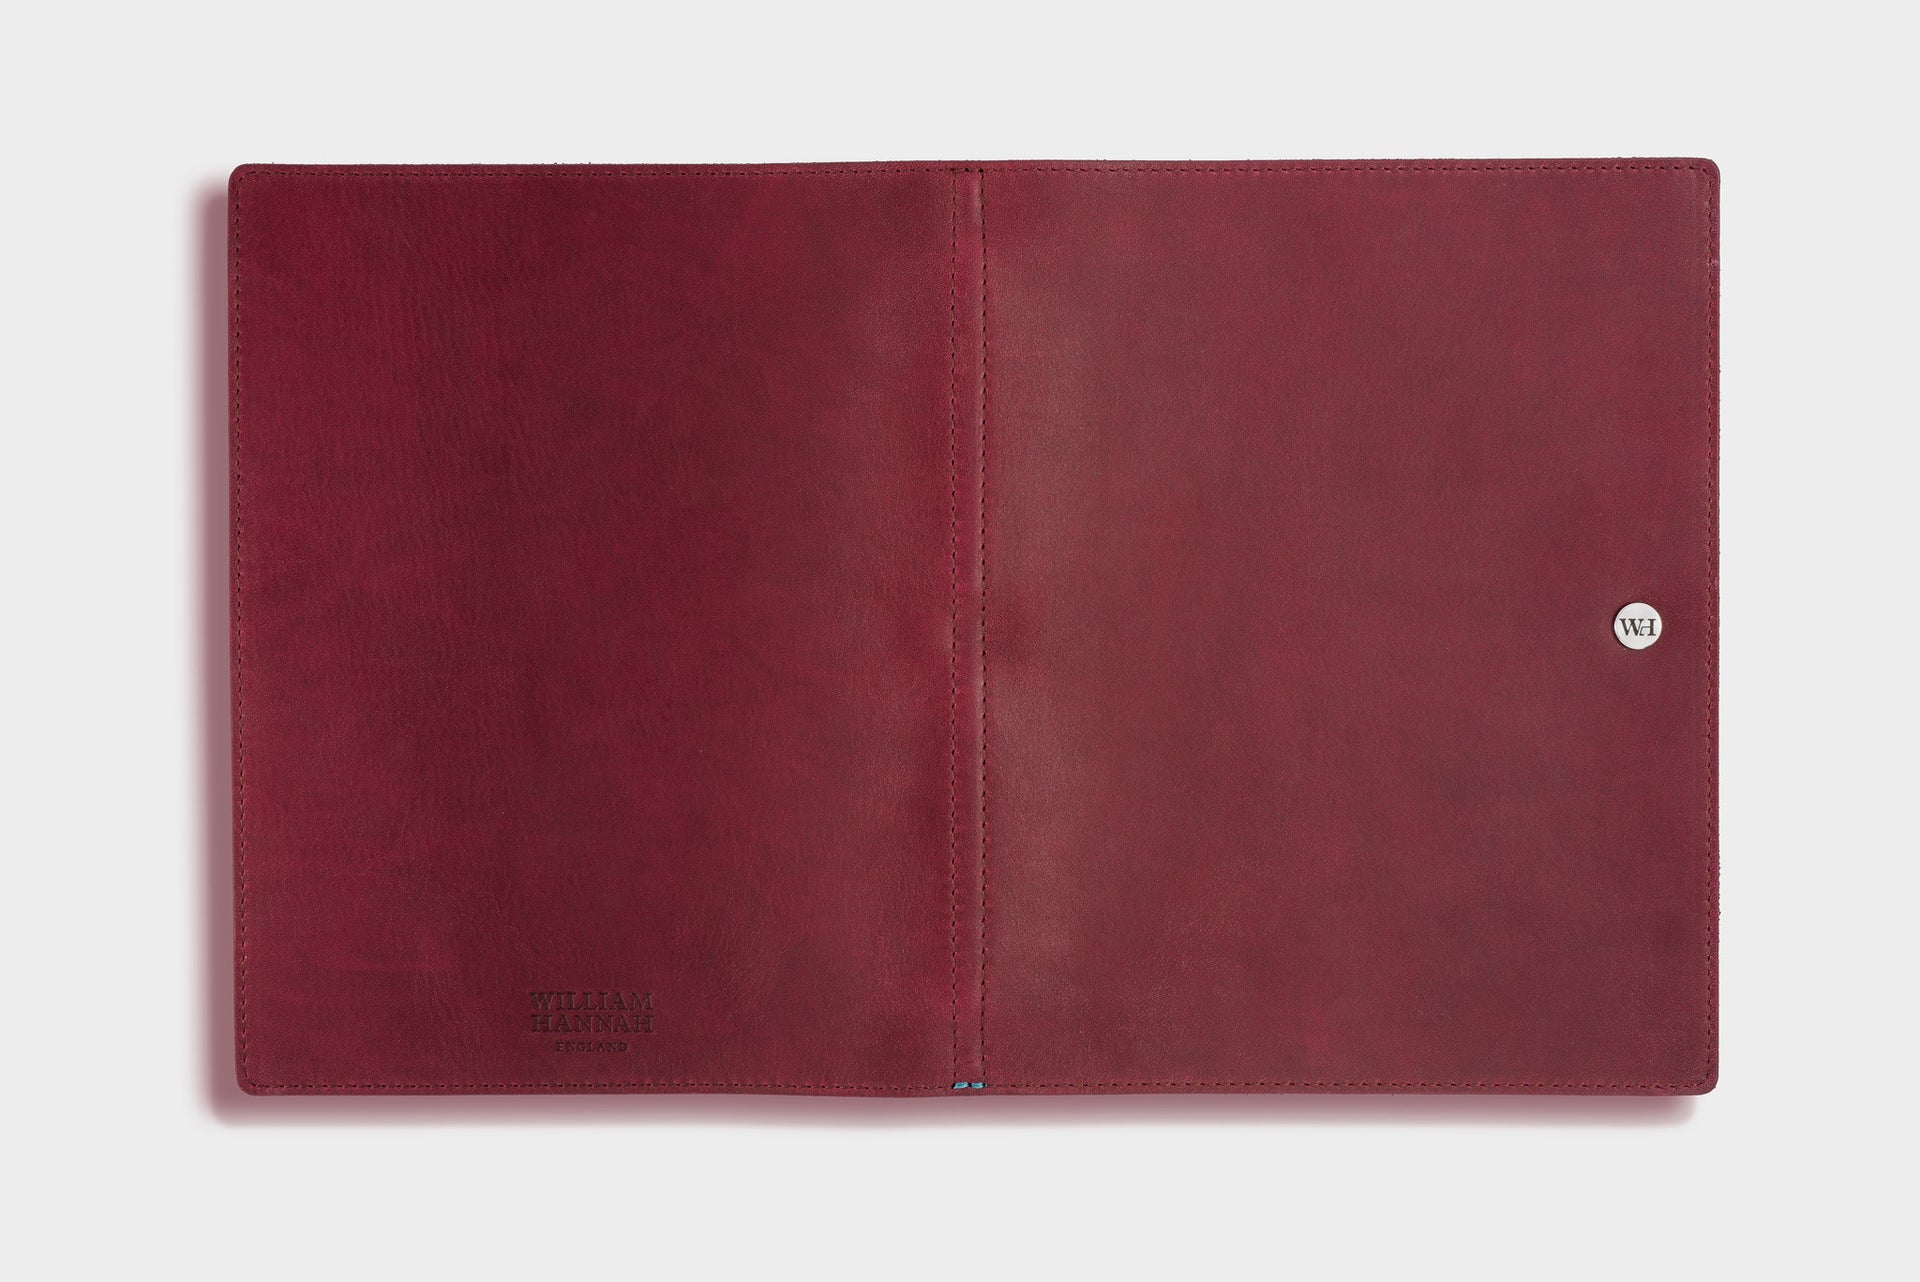 William Hannah Bordeaux leather and Blue suede A5 notebook: full cover